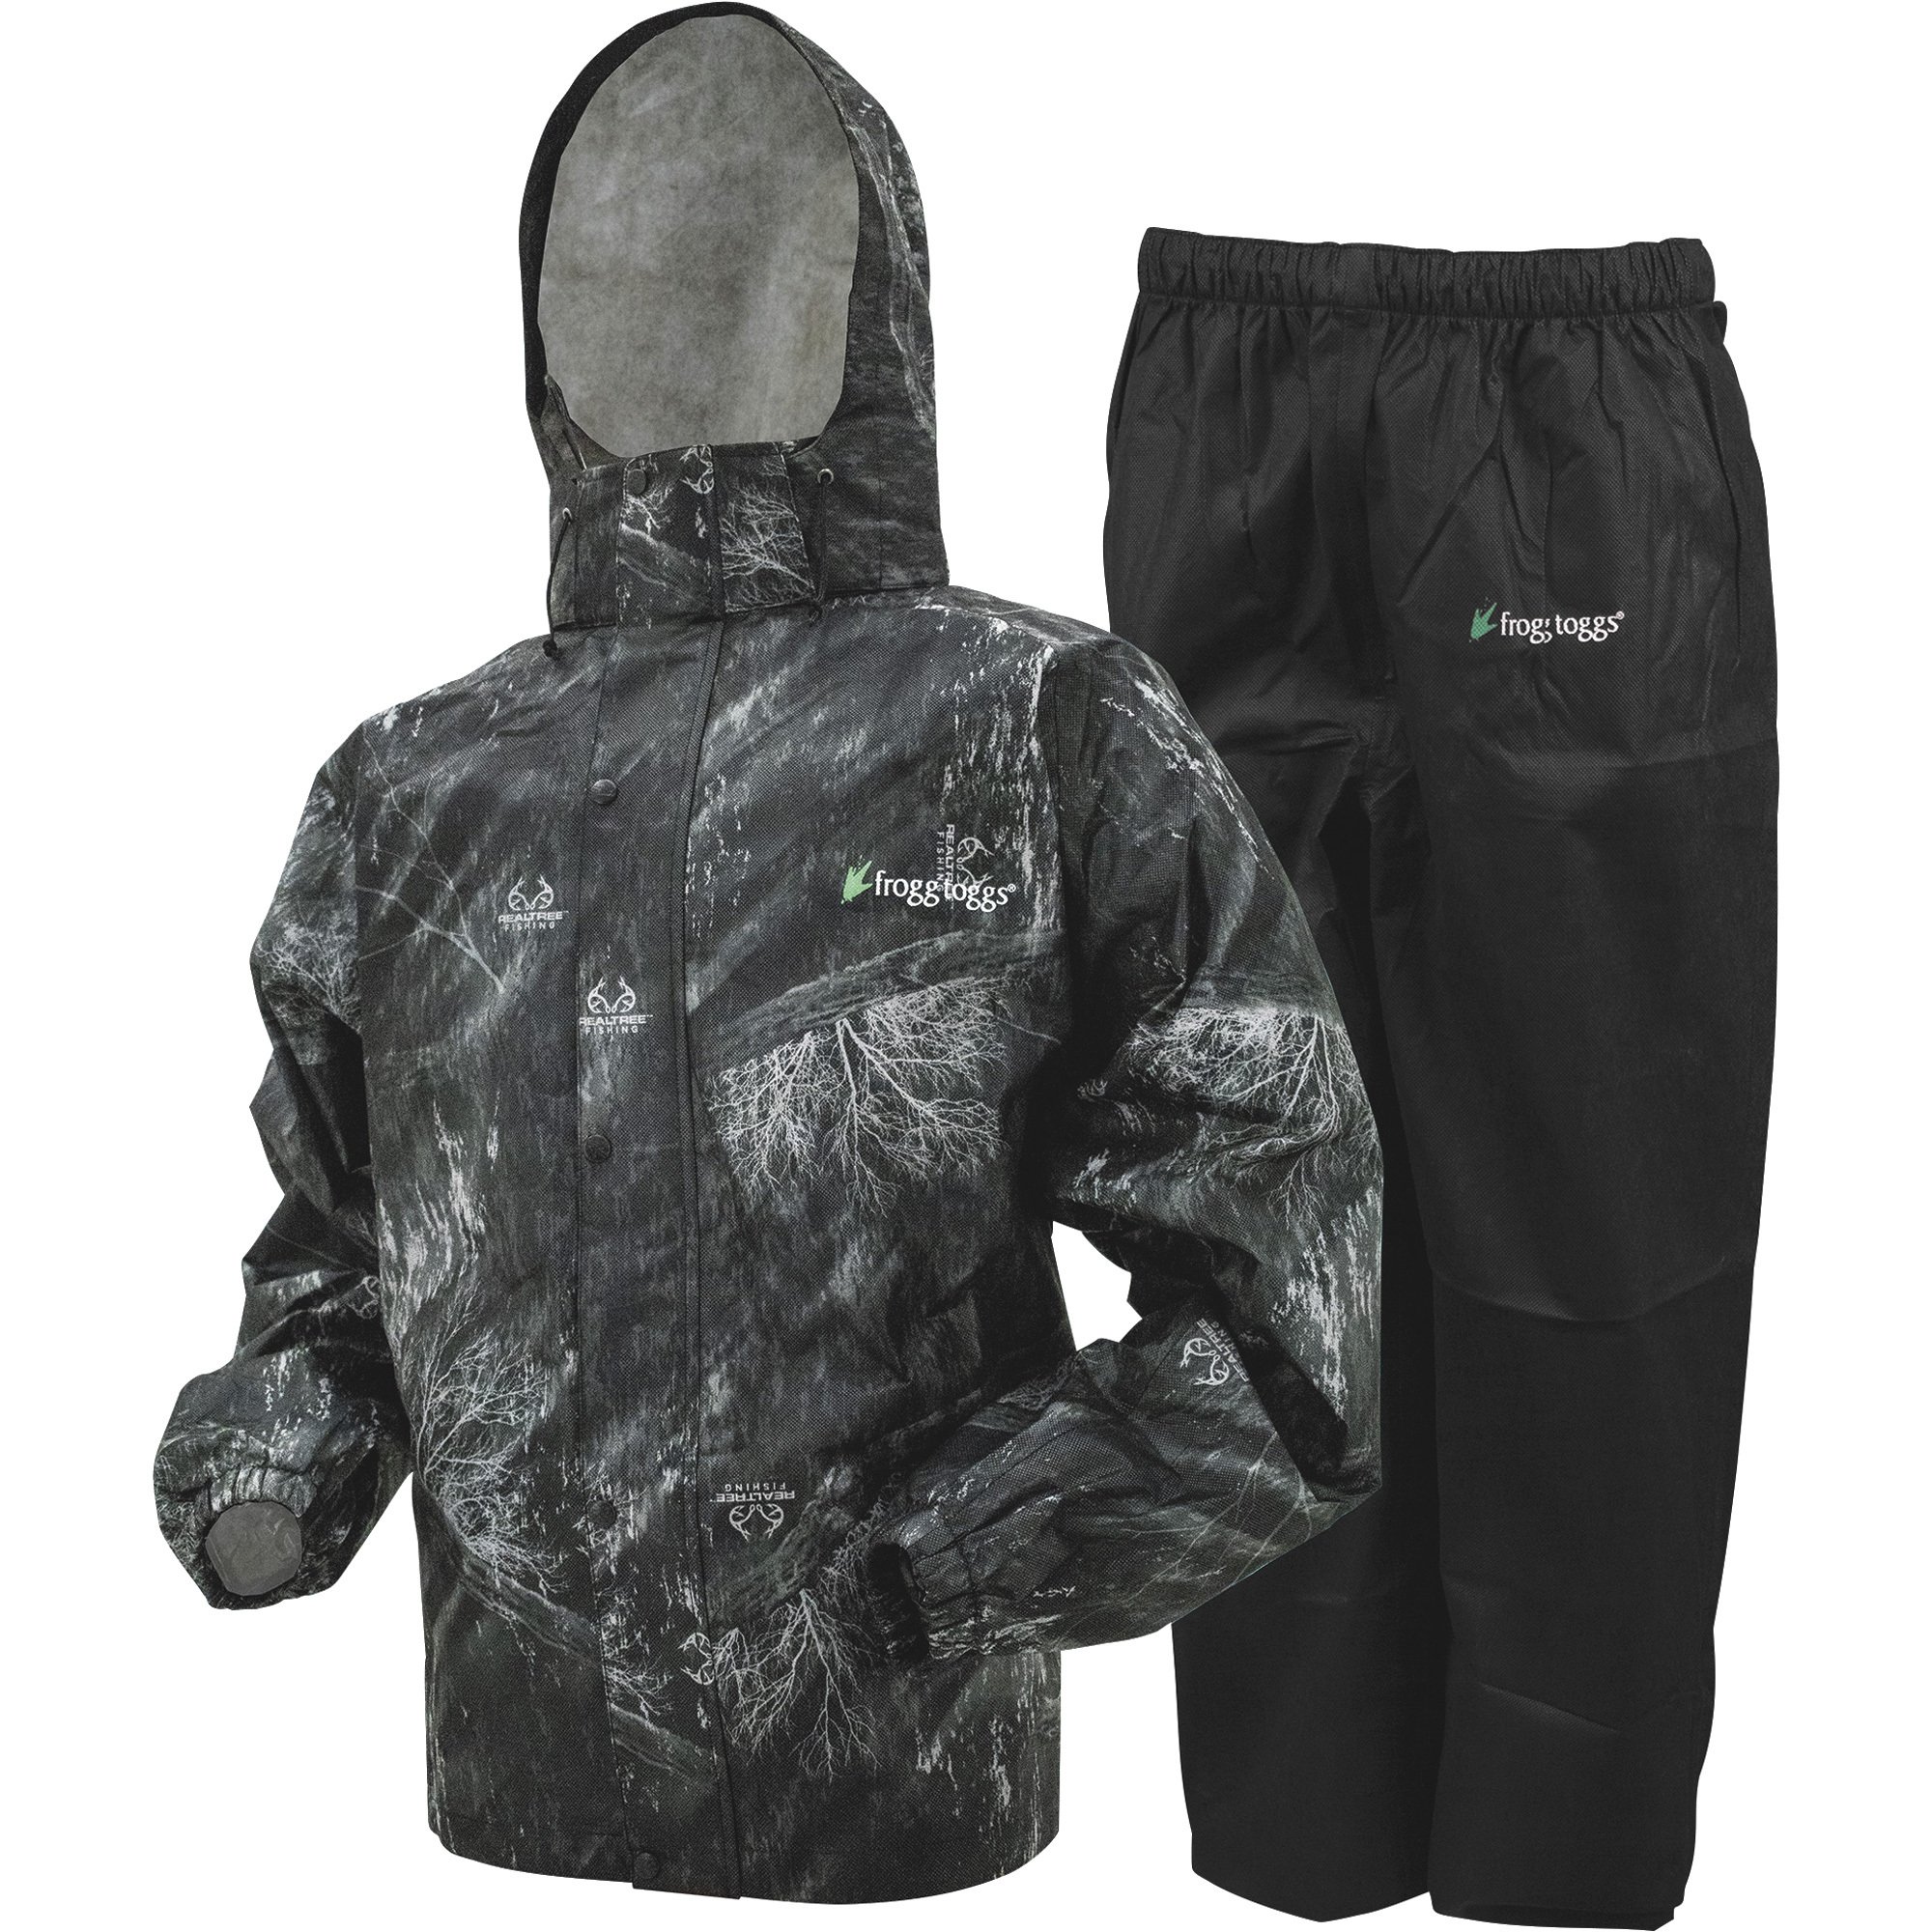 Frogg Toggs Men's All Sports Rain and Wind Jacket and Pants Suit — Realtree  Fishing Dark Blue Jacket/Black Pants, XL, Model# AS1310-166XL